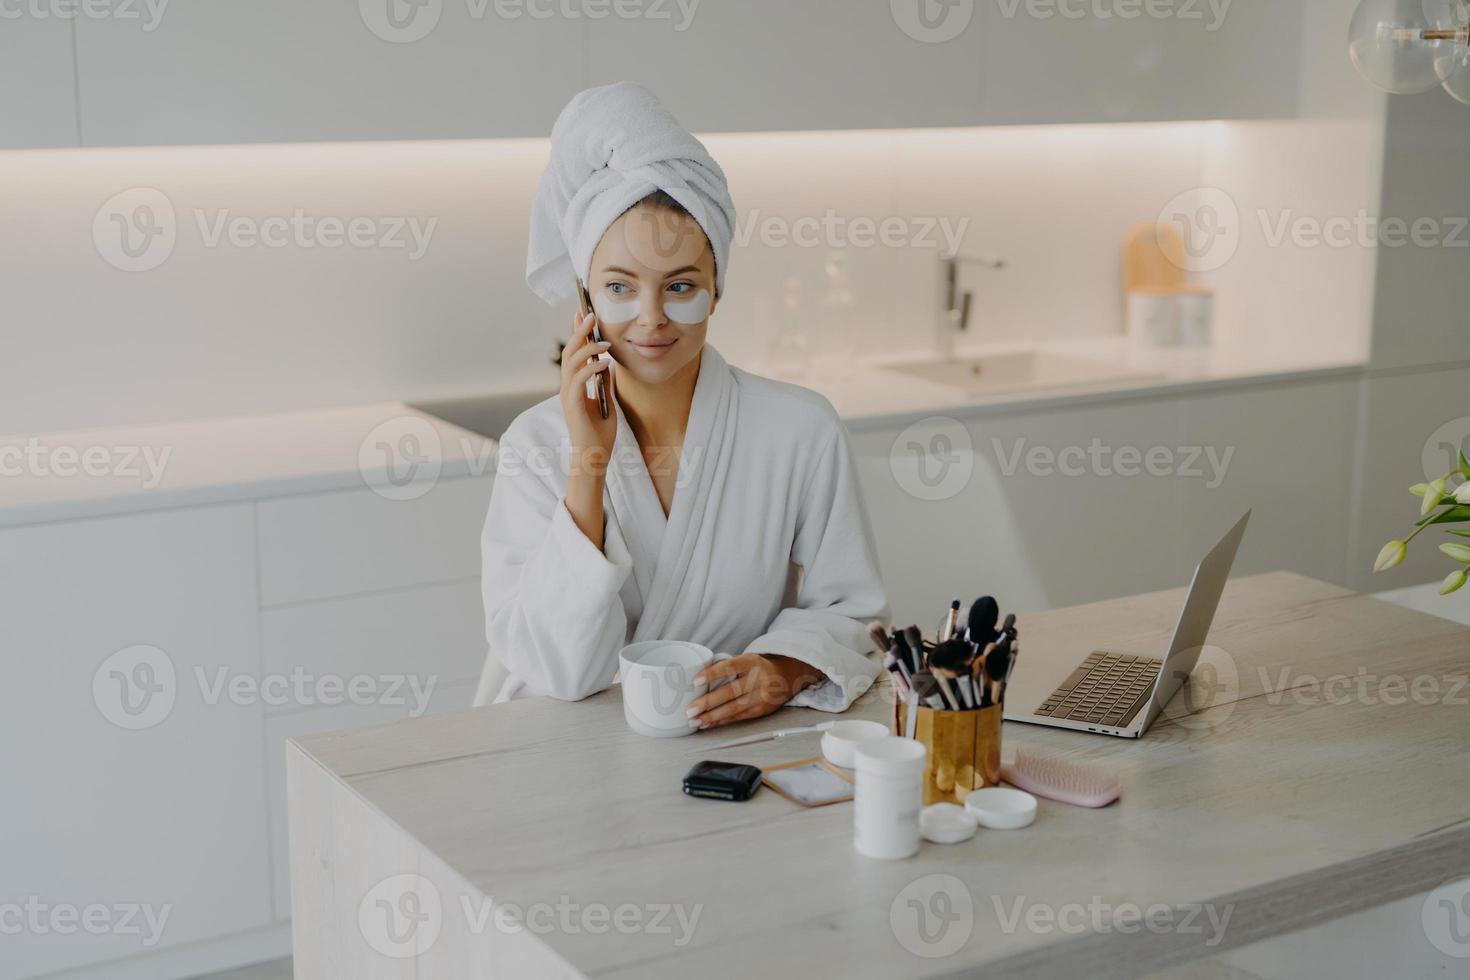 Lovely female model wears bathrobe and soft towel wrapped on head undergoes skin care procedures applies beauty patches under eyes has coffee break while talking with friend via cellular being at home photo